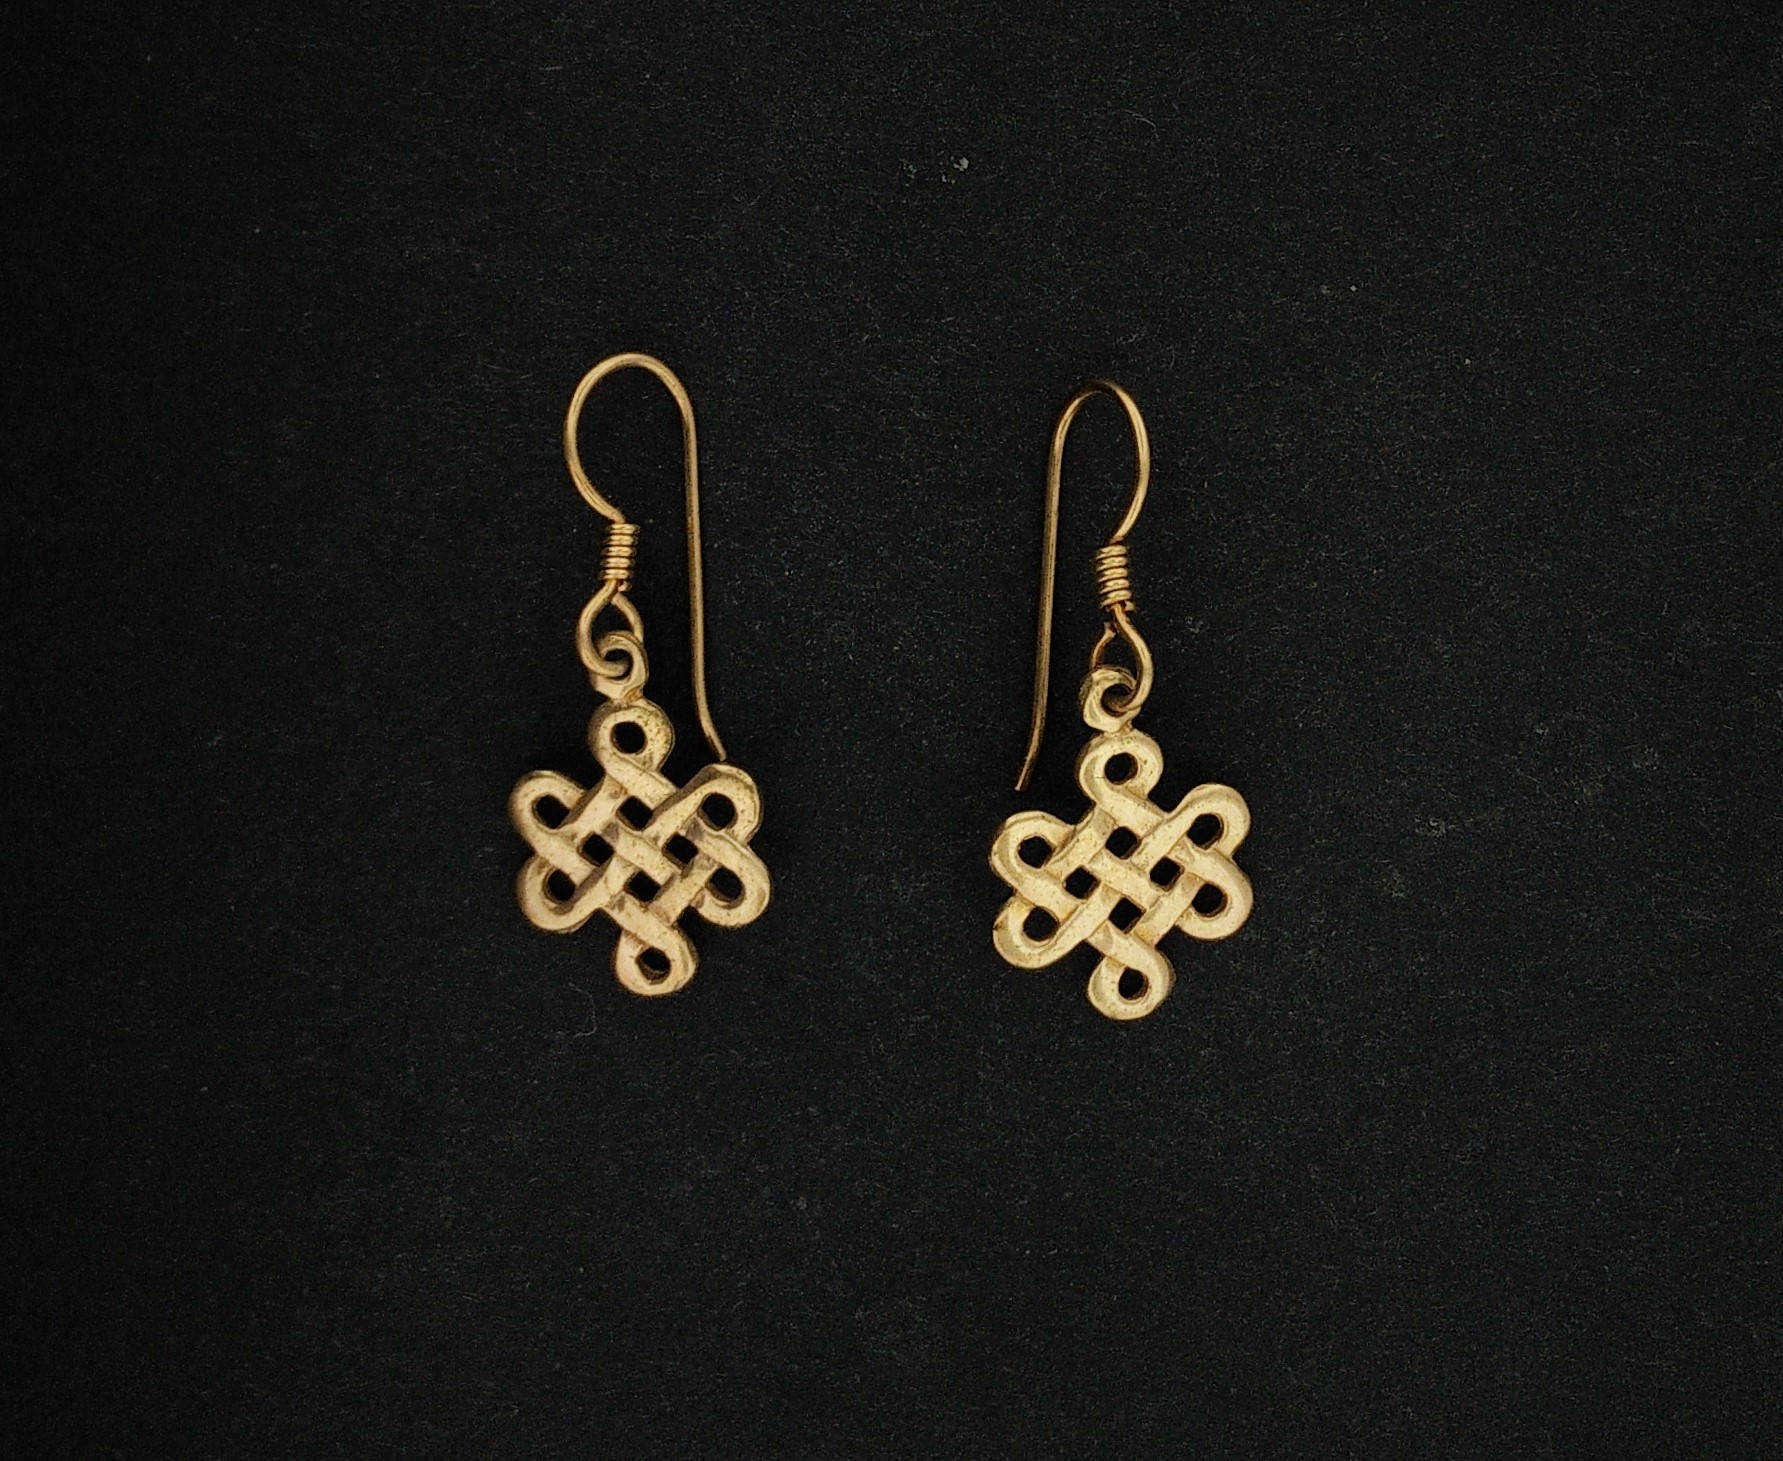 Gold Endless Knot Earrings Made to Order Gold Tibetan Earrings, Gold Knotwork Earrings, Endless Knot Earrings, Buddhist Gold Earrings, Gold Knot Earrings, Gold Chiese Knots, Gold Knot Earrings, Gold Infinity Earrings, Celtic Knot Earrings